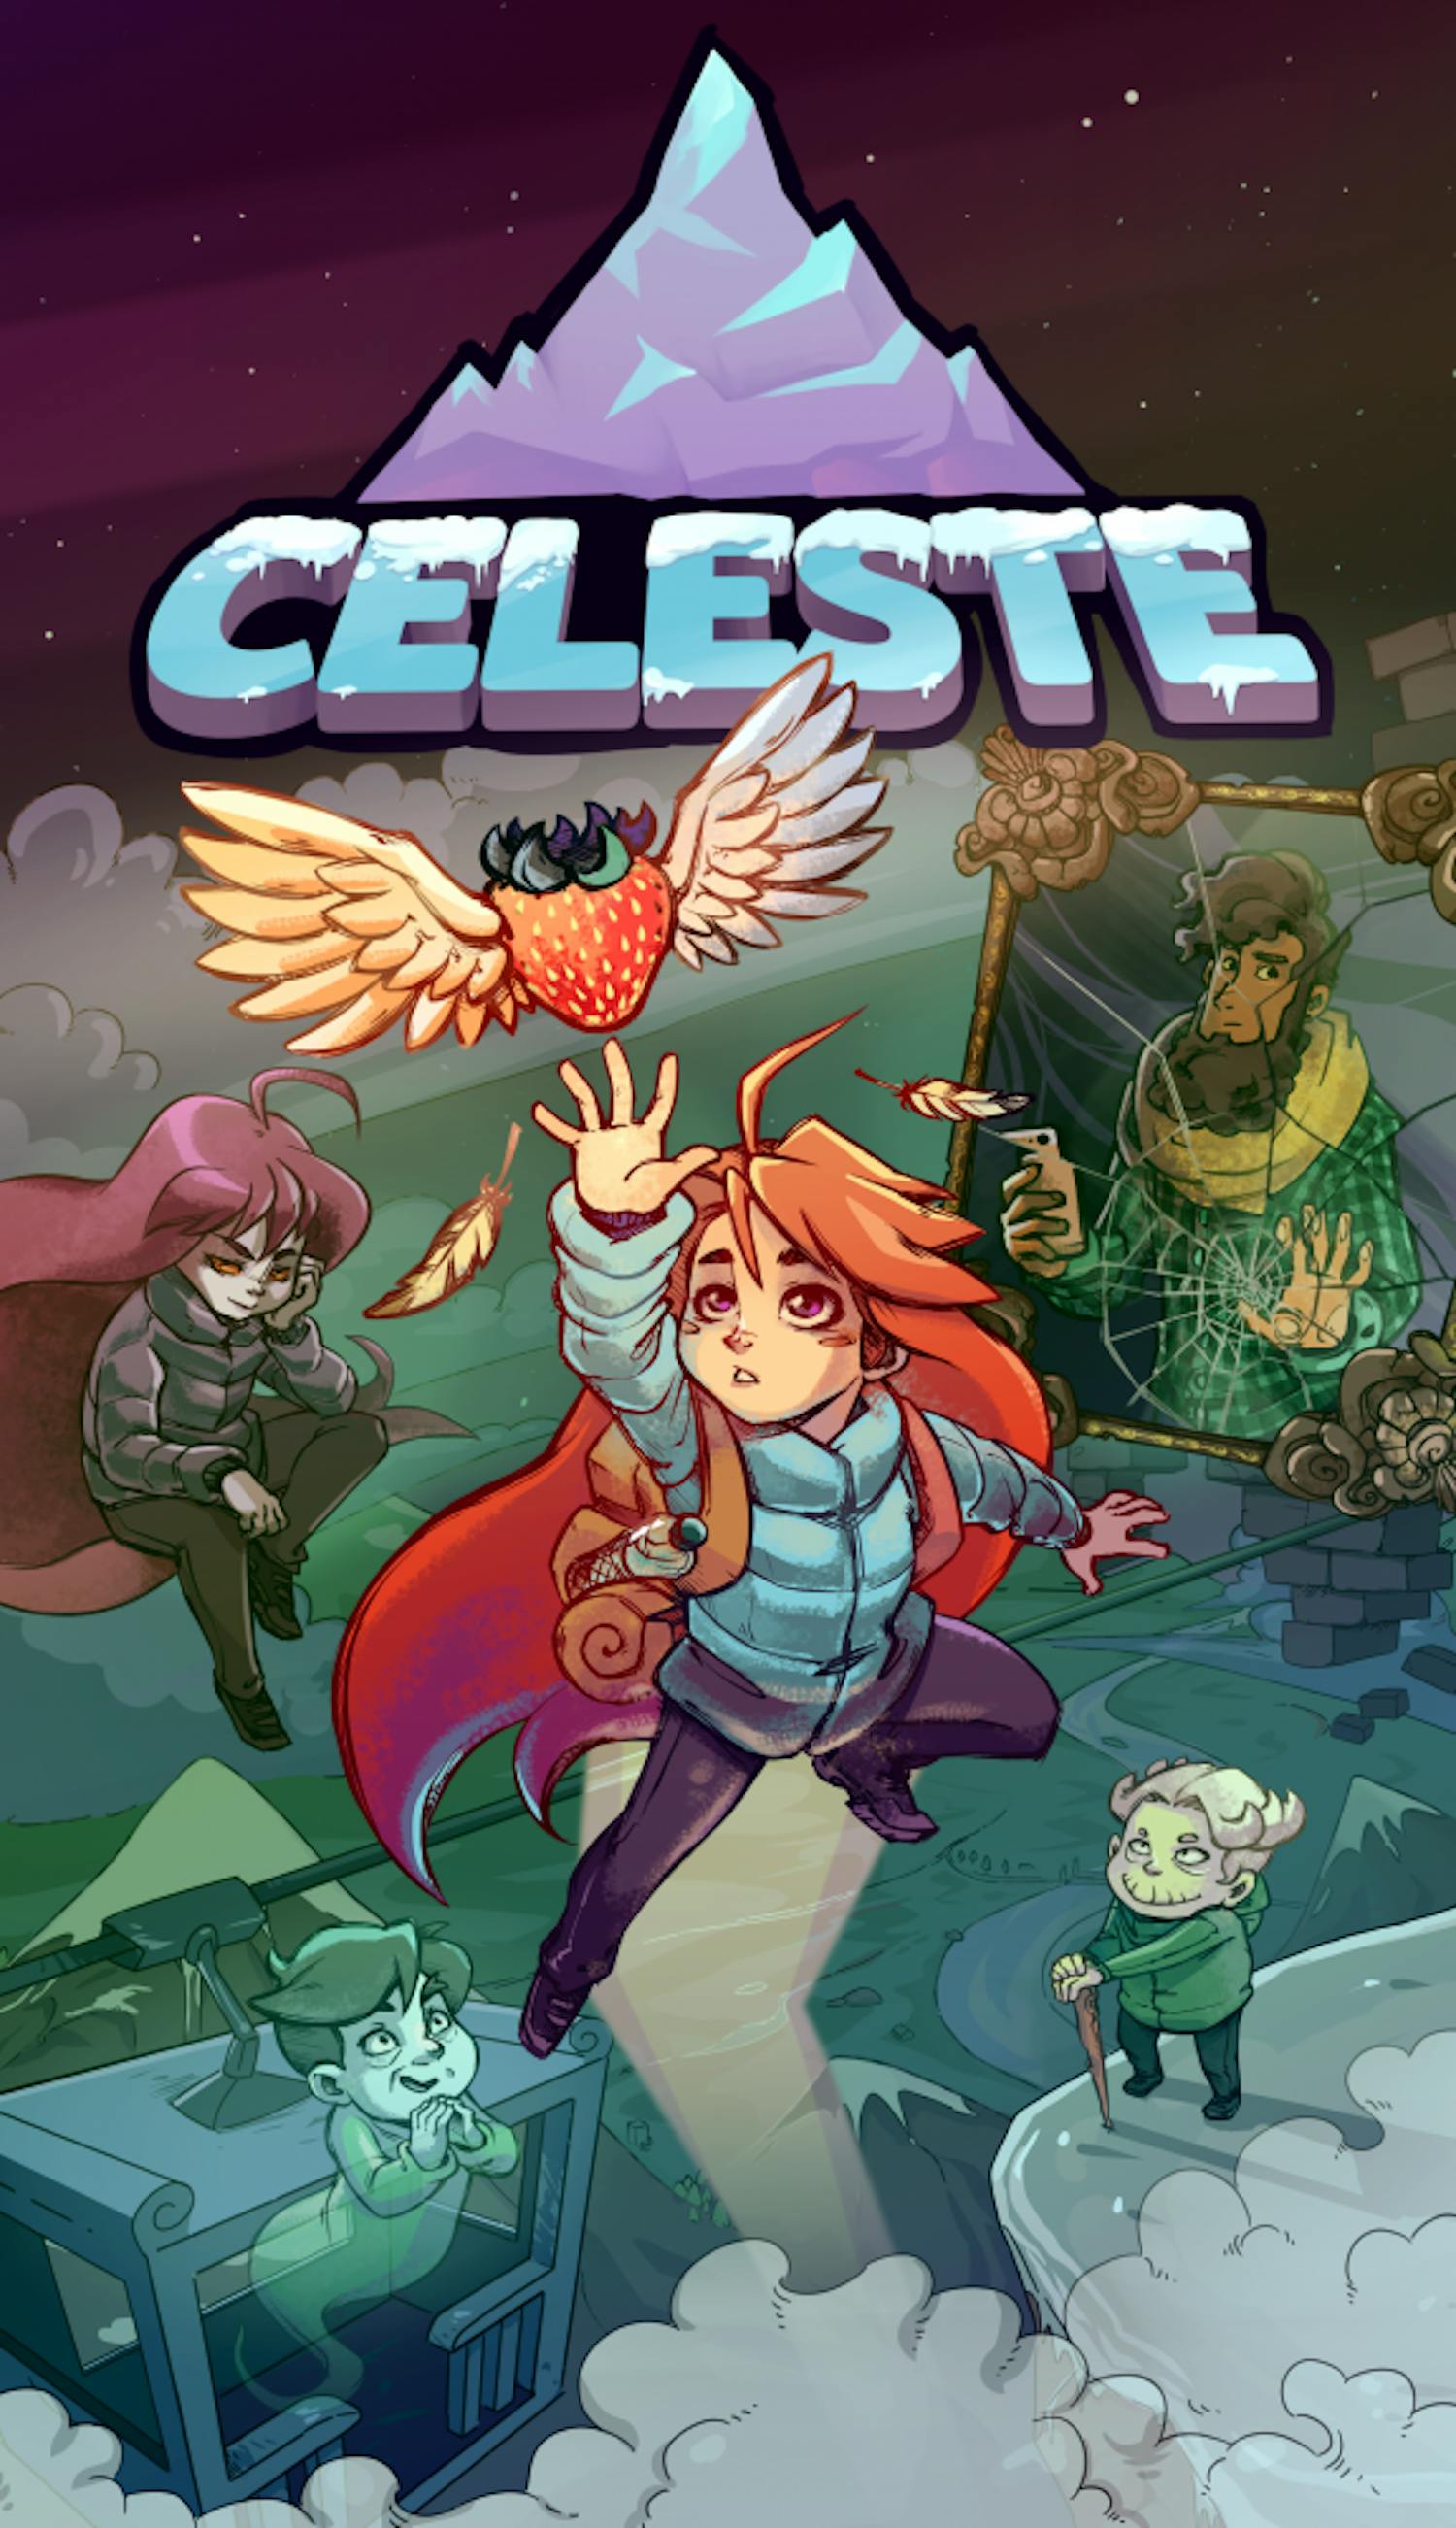 "Celeste" is out now for PlayStation 4, Xbox One, Switch, PC, macOS and Linux.